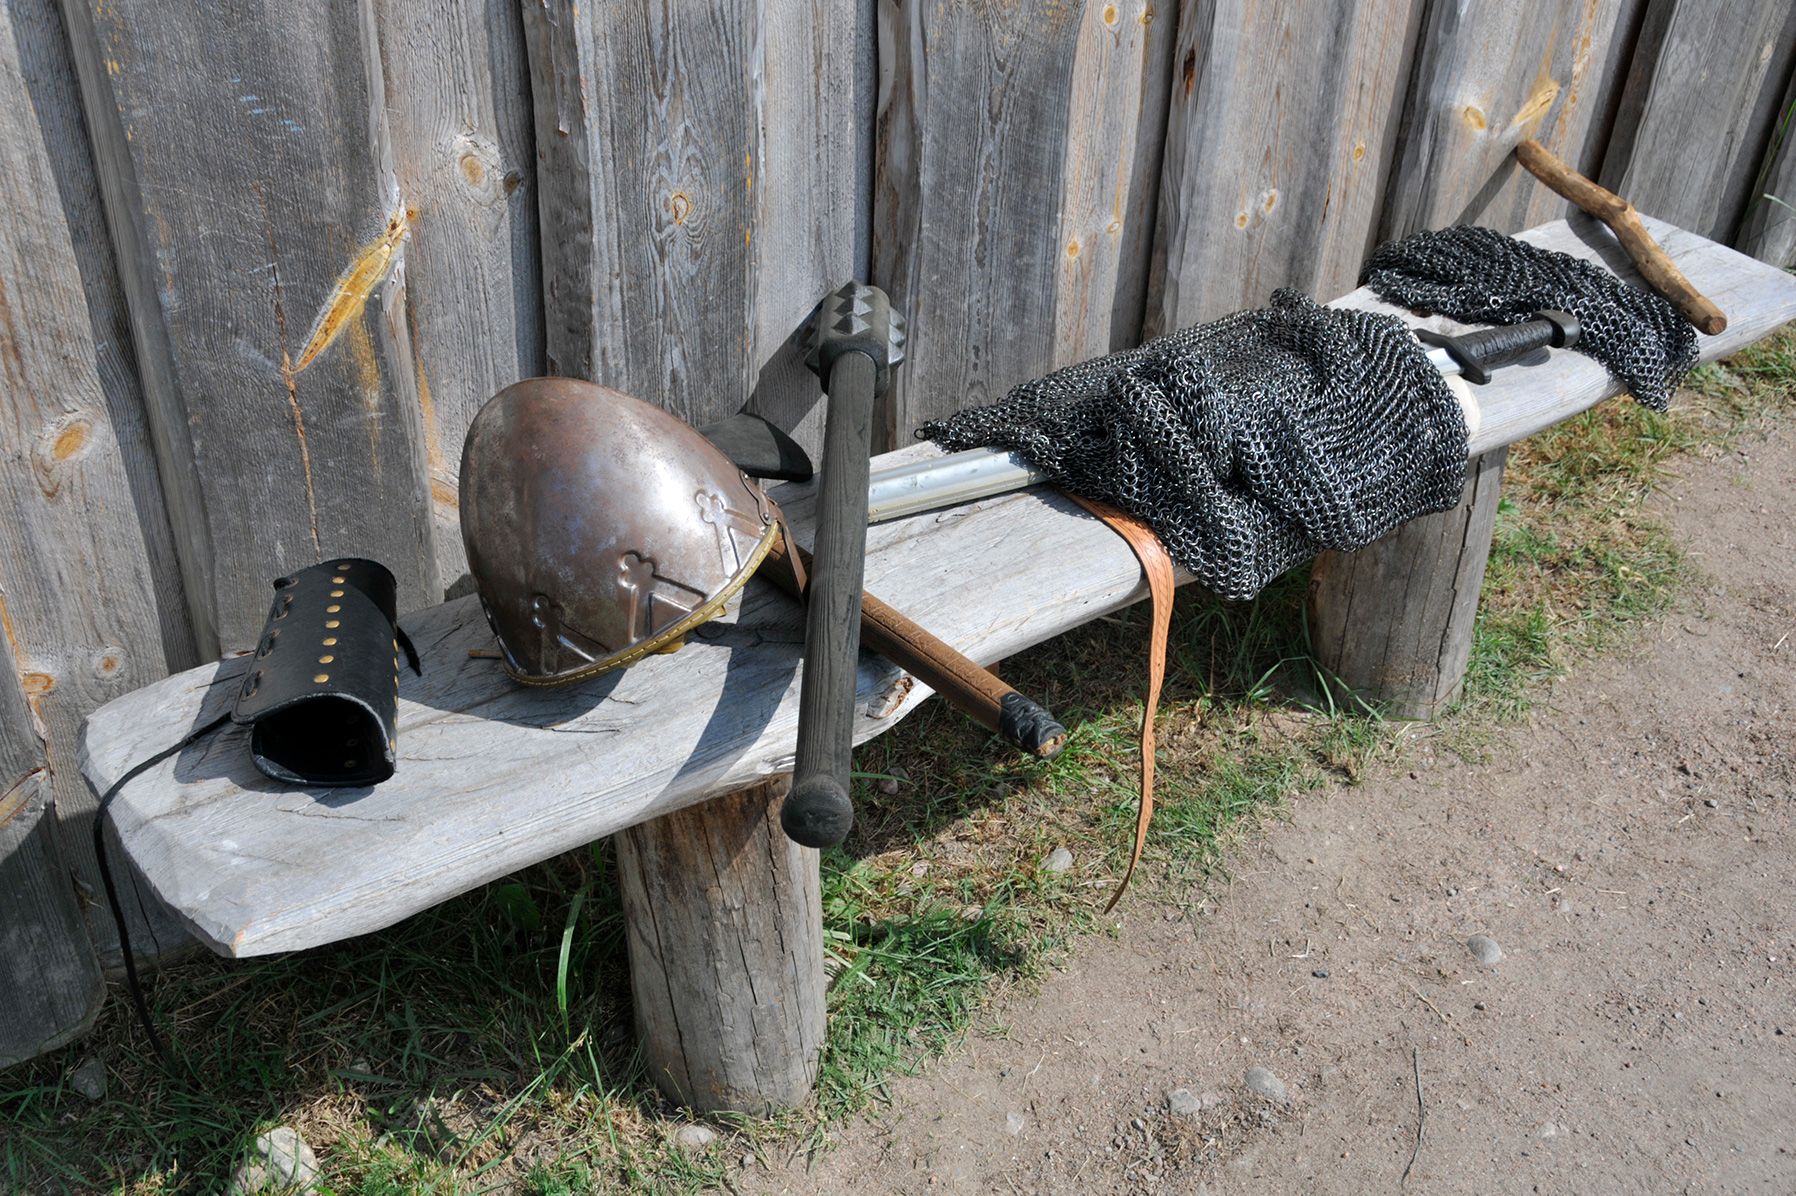 Bronze Viking helmets on a wooden bench along with a metal chest plate and sword.